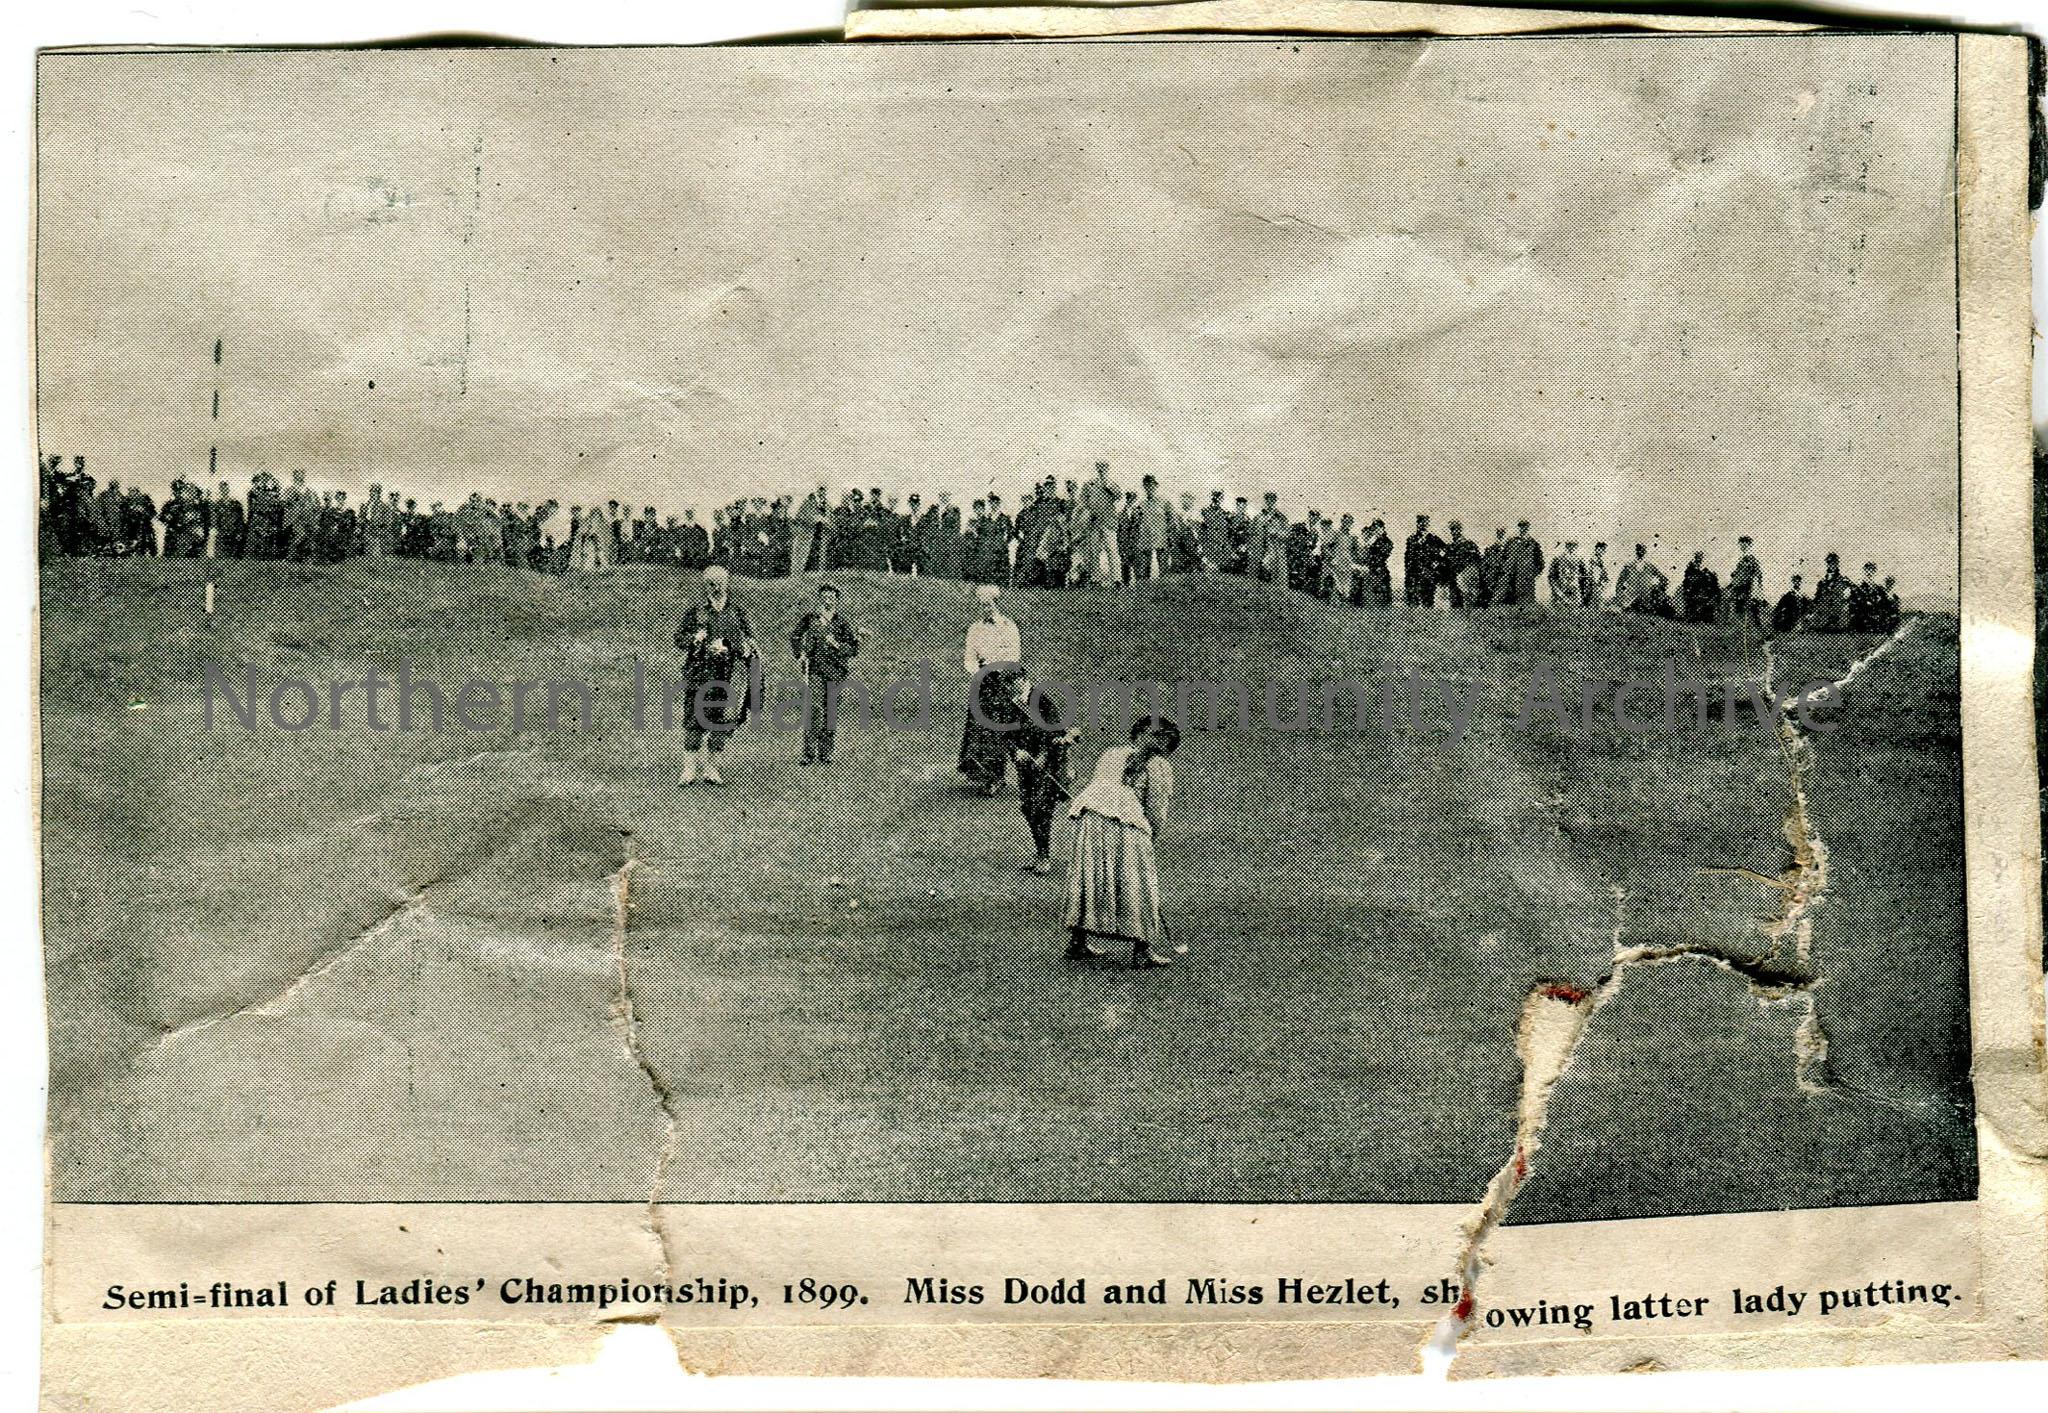 Photograph cut from larger paper page, showing Violet Hezlet putting during semi-final of Ladies Championship in 1899 – does not state name of champio…